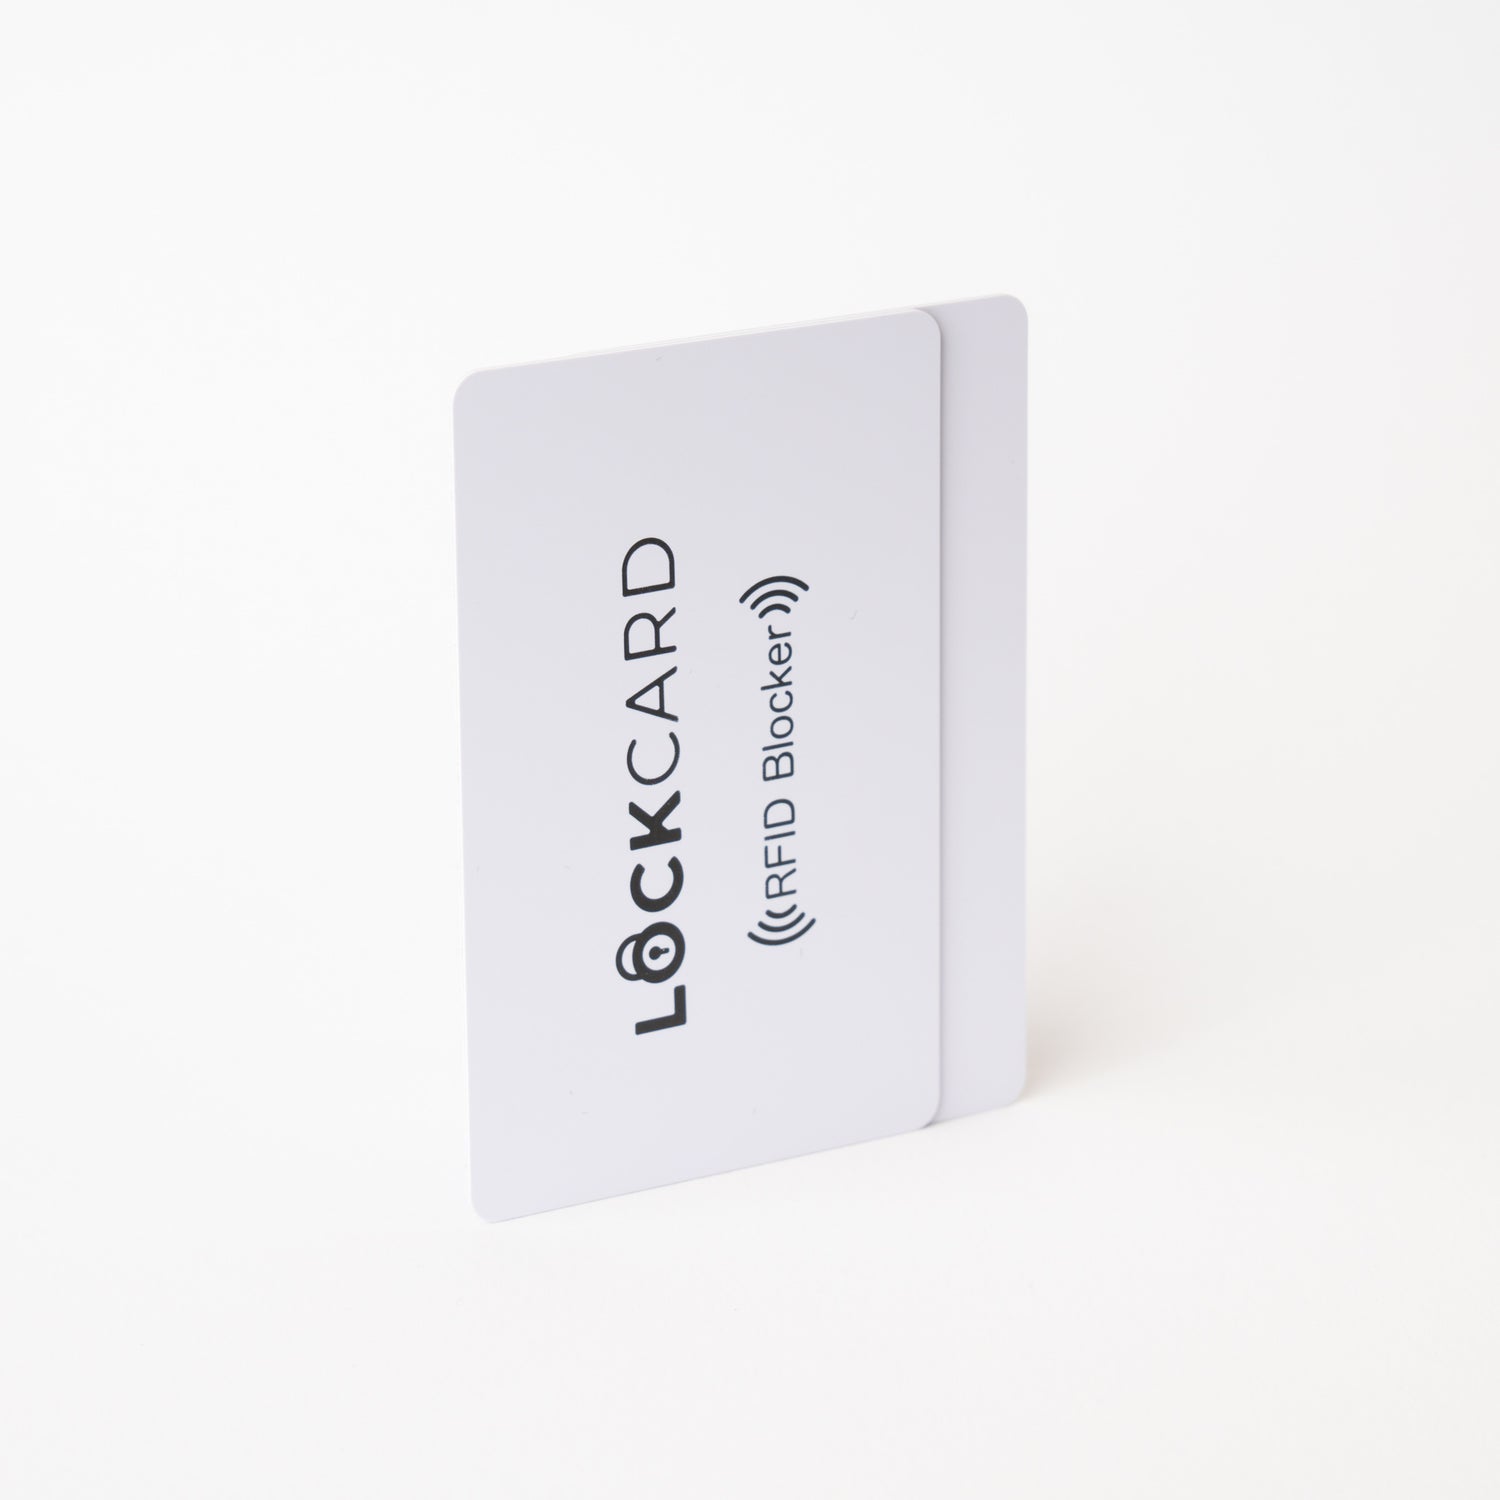 Active and Passive RFID Blocking Cards - What are the Differences?